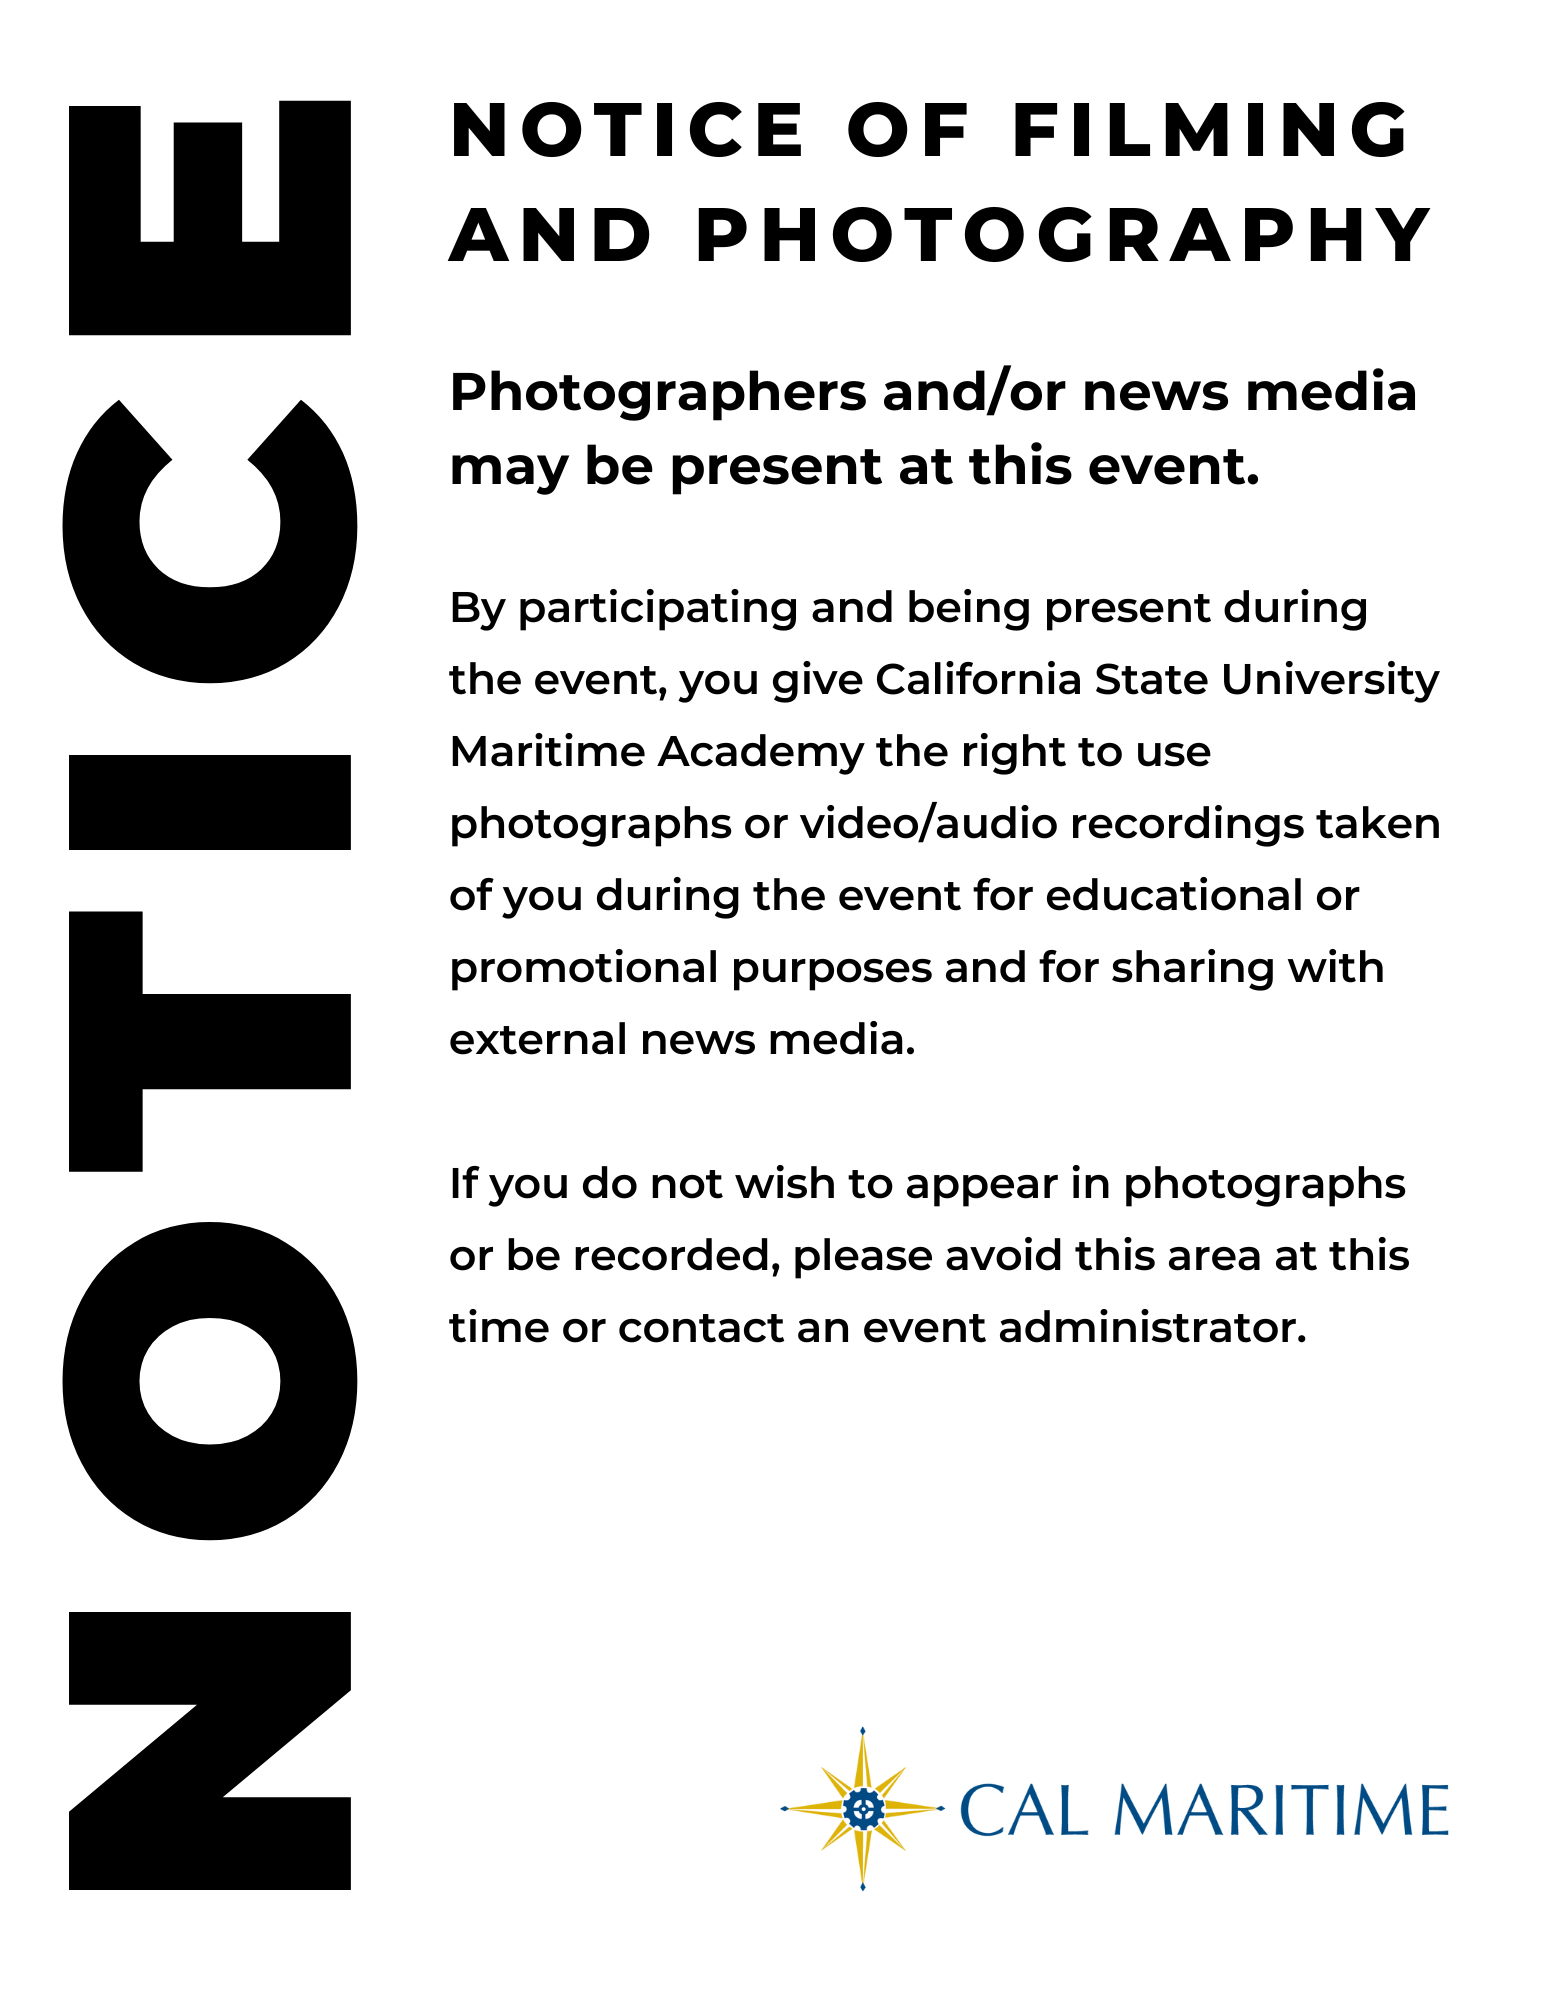 NOTICE OF FILMING AND PHOTOGRAPHY - LETTER BLACK